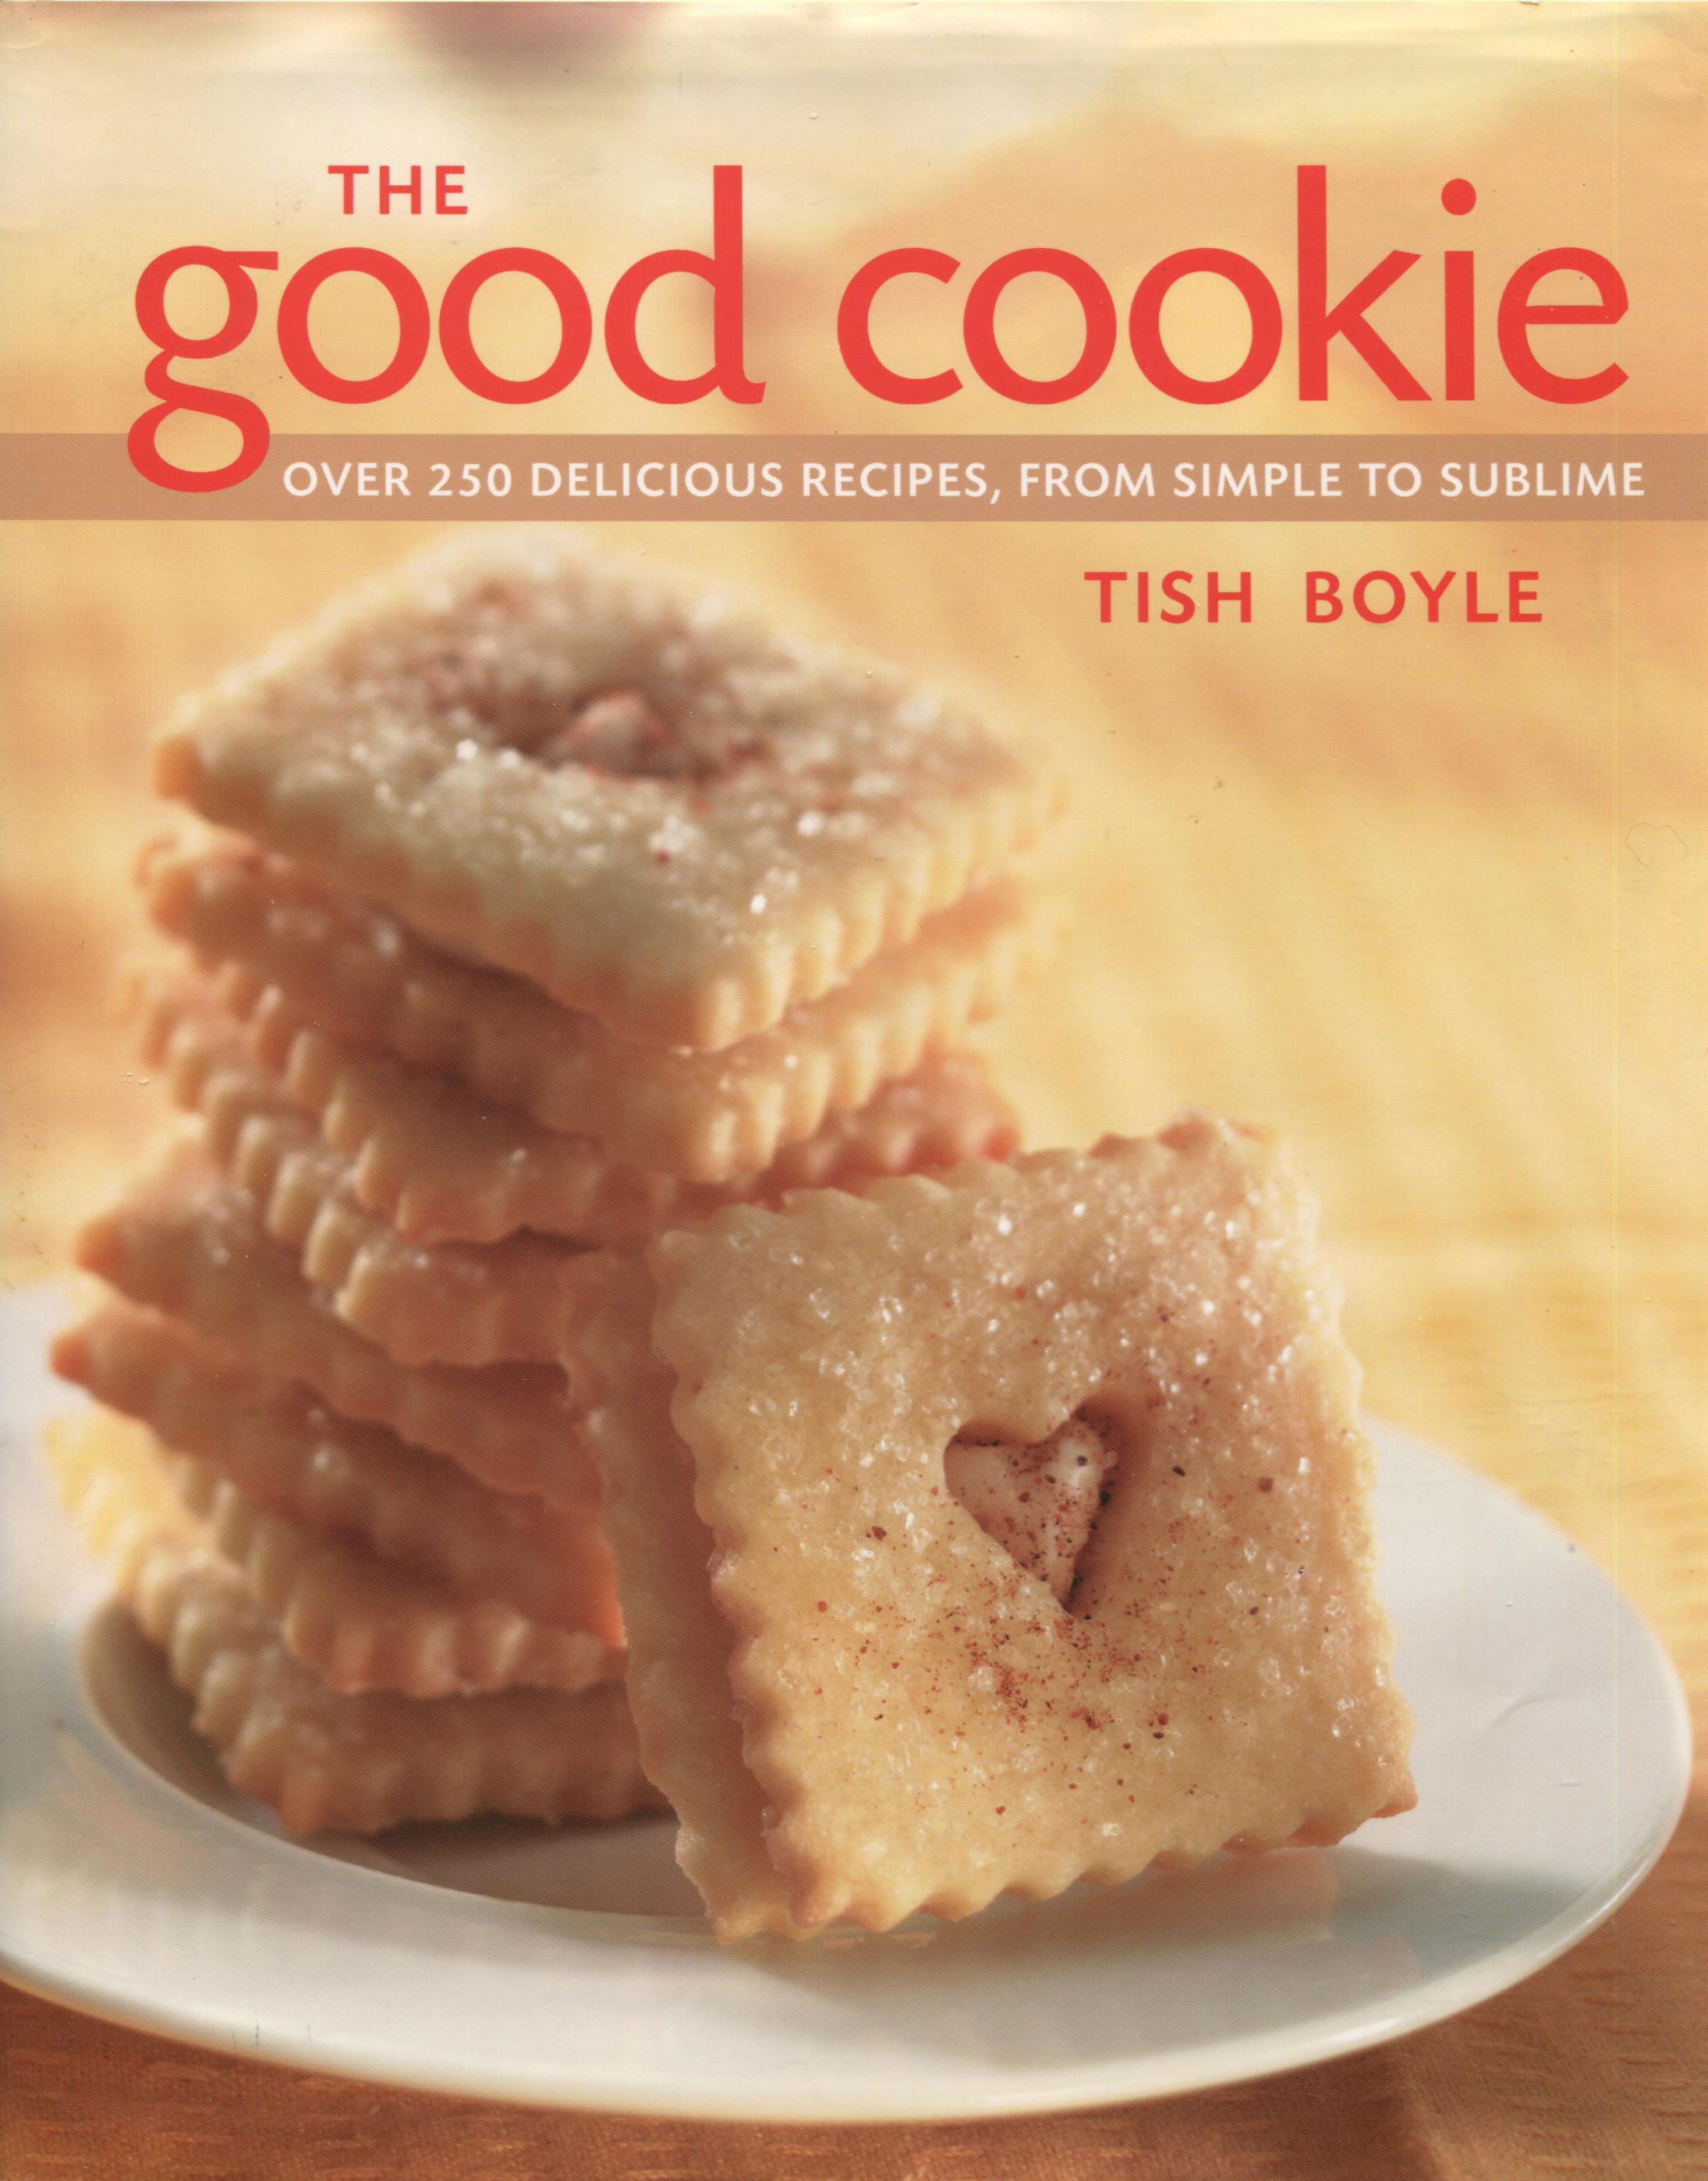 TBT Cookbook Review: The Good Cookie by Tish Boyle